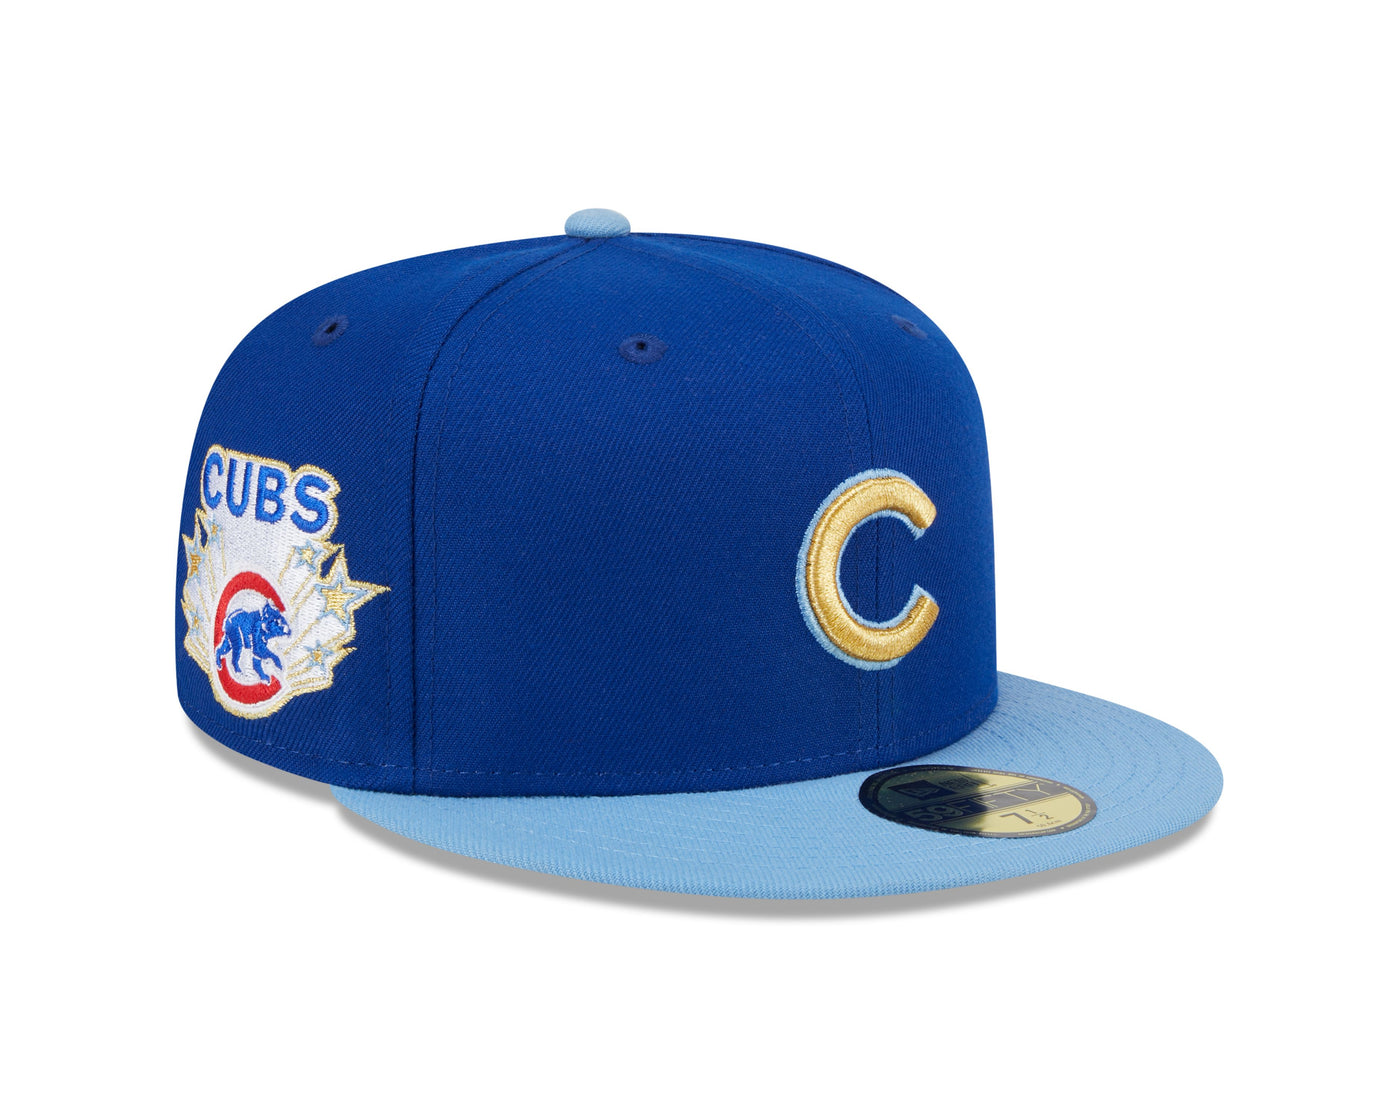 CHICAGO CUBS NEW ERA GOLD C LOGO TWO TONE 59FIFTY CAP